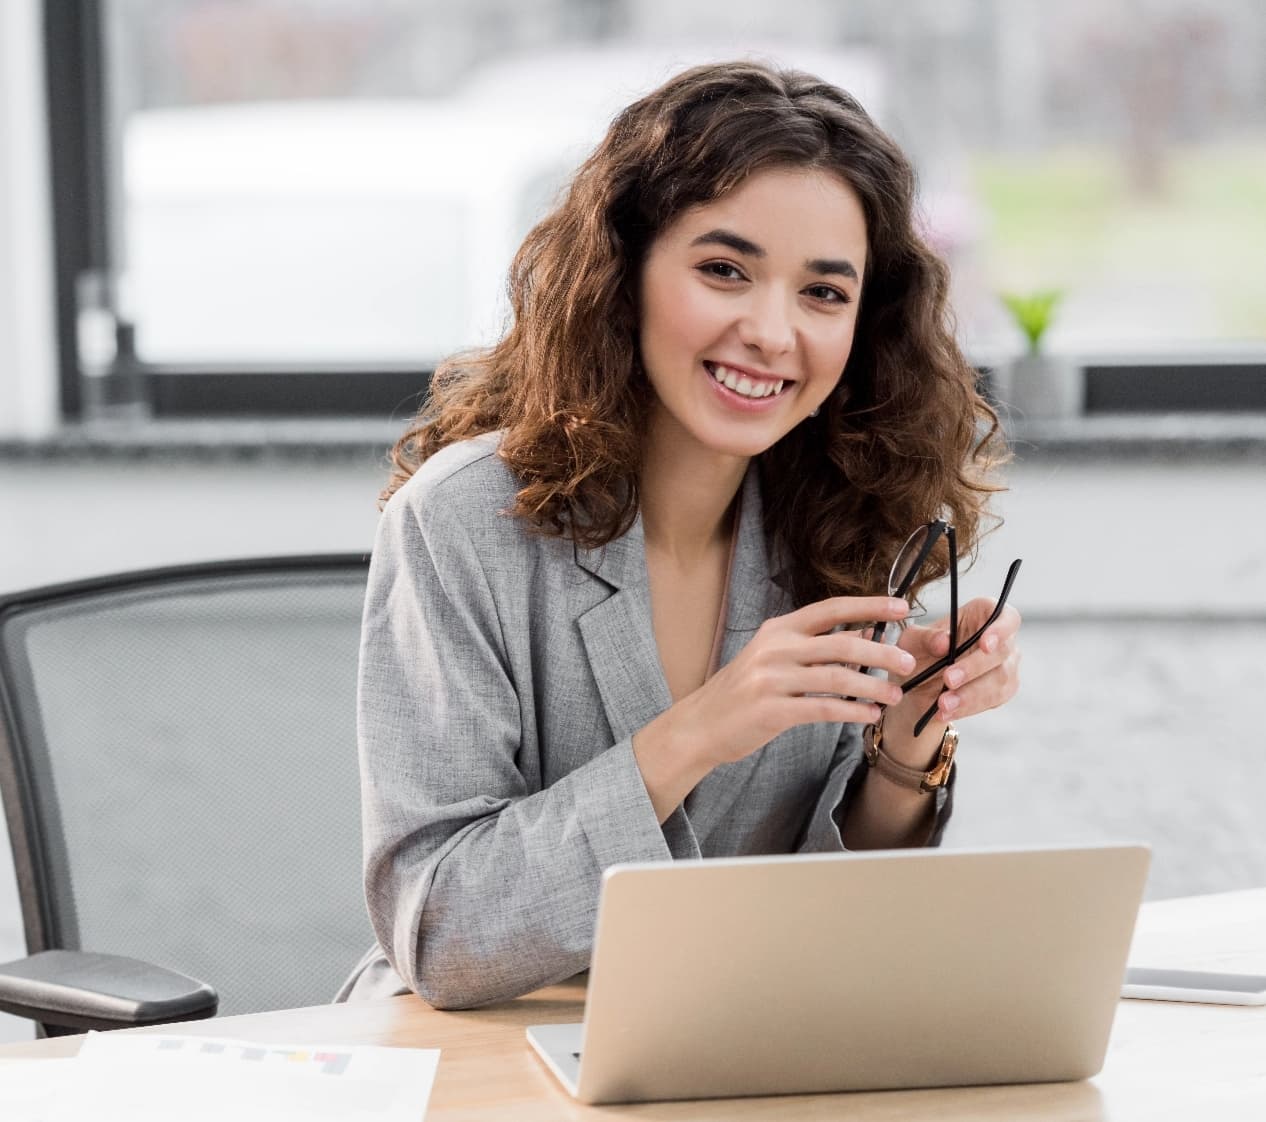 Girl sitting infront of laptop smiling while holding a pair of glasses